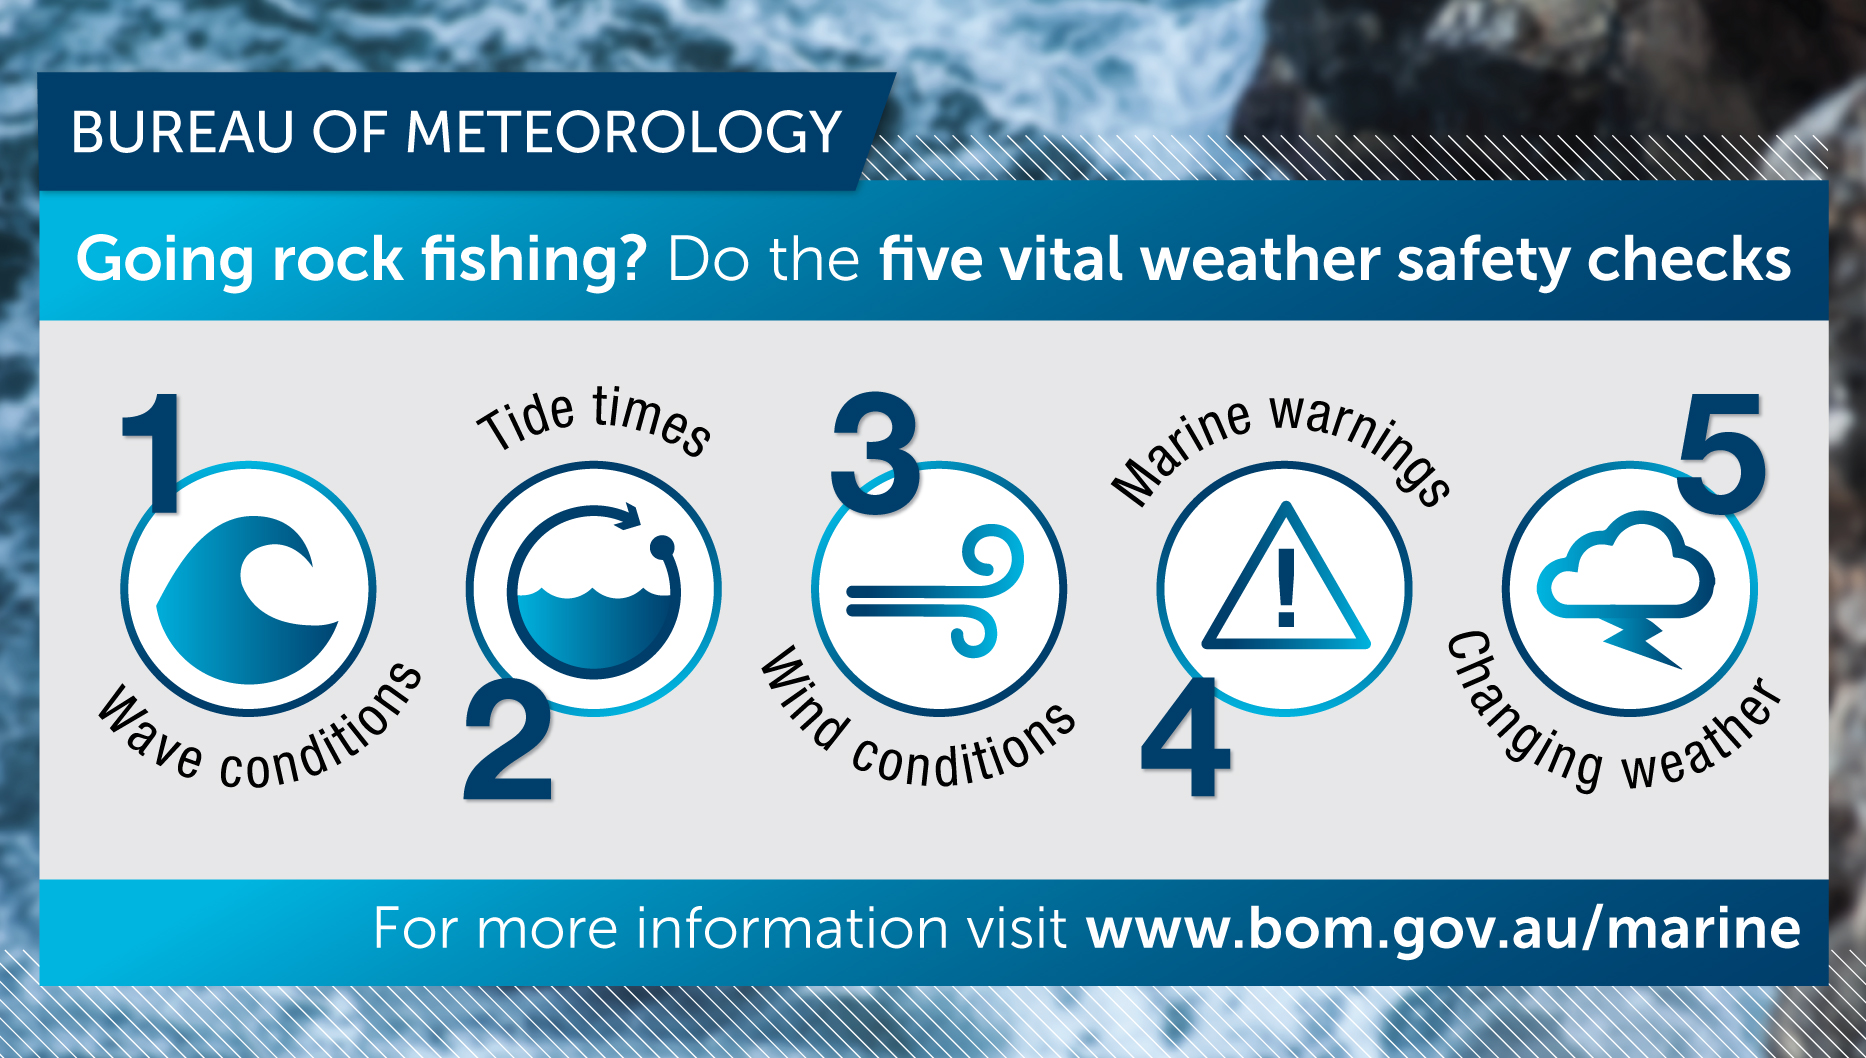 Going rock fishing? Do the five vital weather safety checks. 1. Wave conditions, 2. Tide times, 3. Wind conditions, 4. Marine warnings, 5. Changing weather. For more information visit www.bom.gov.au/marine.